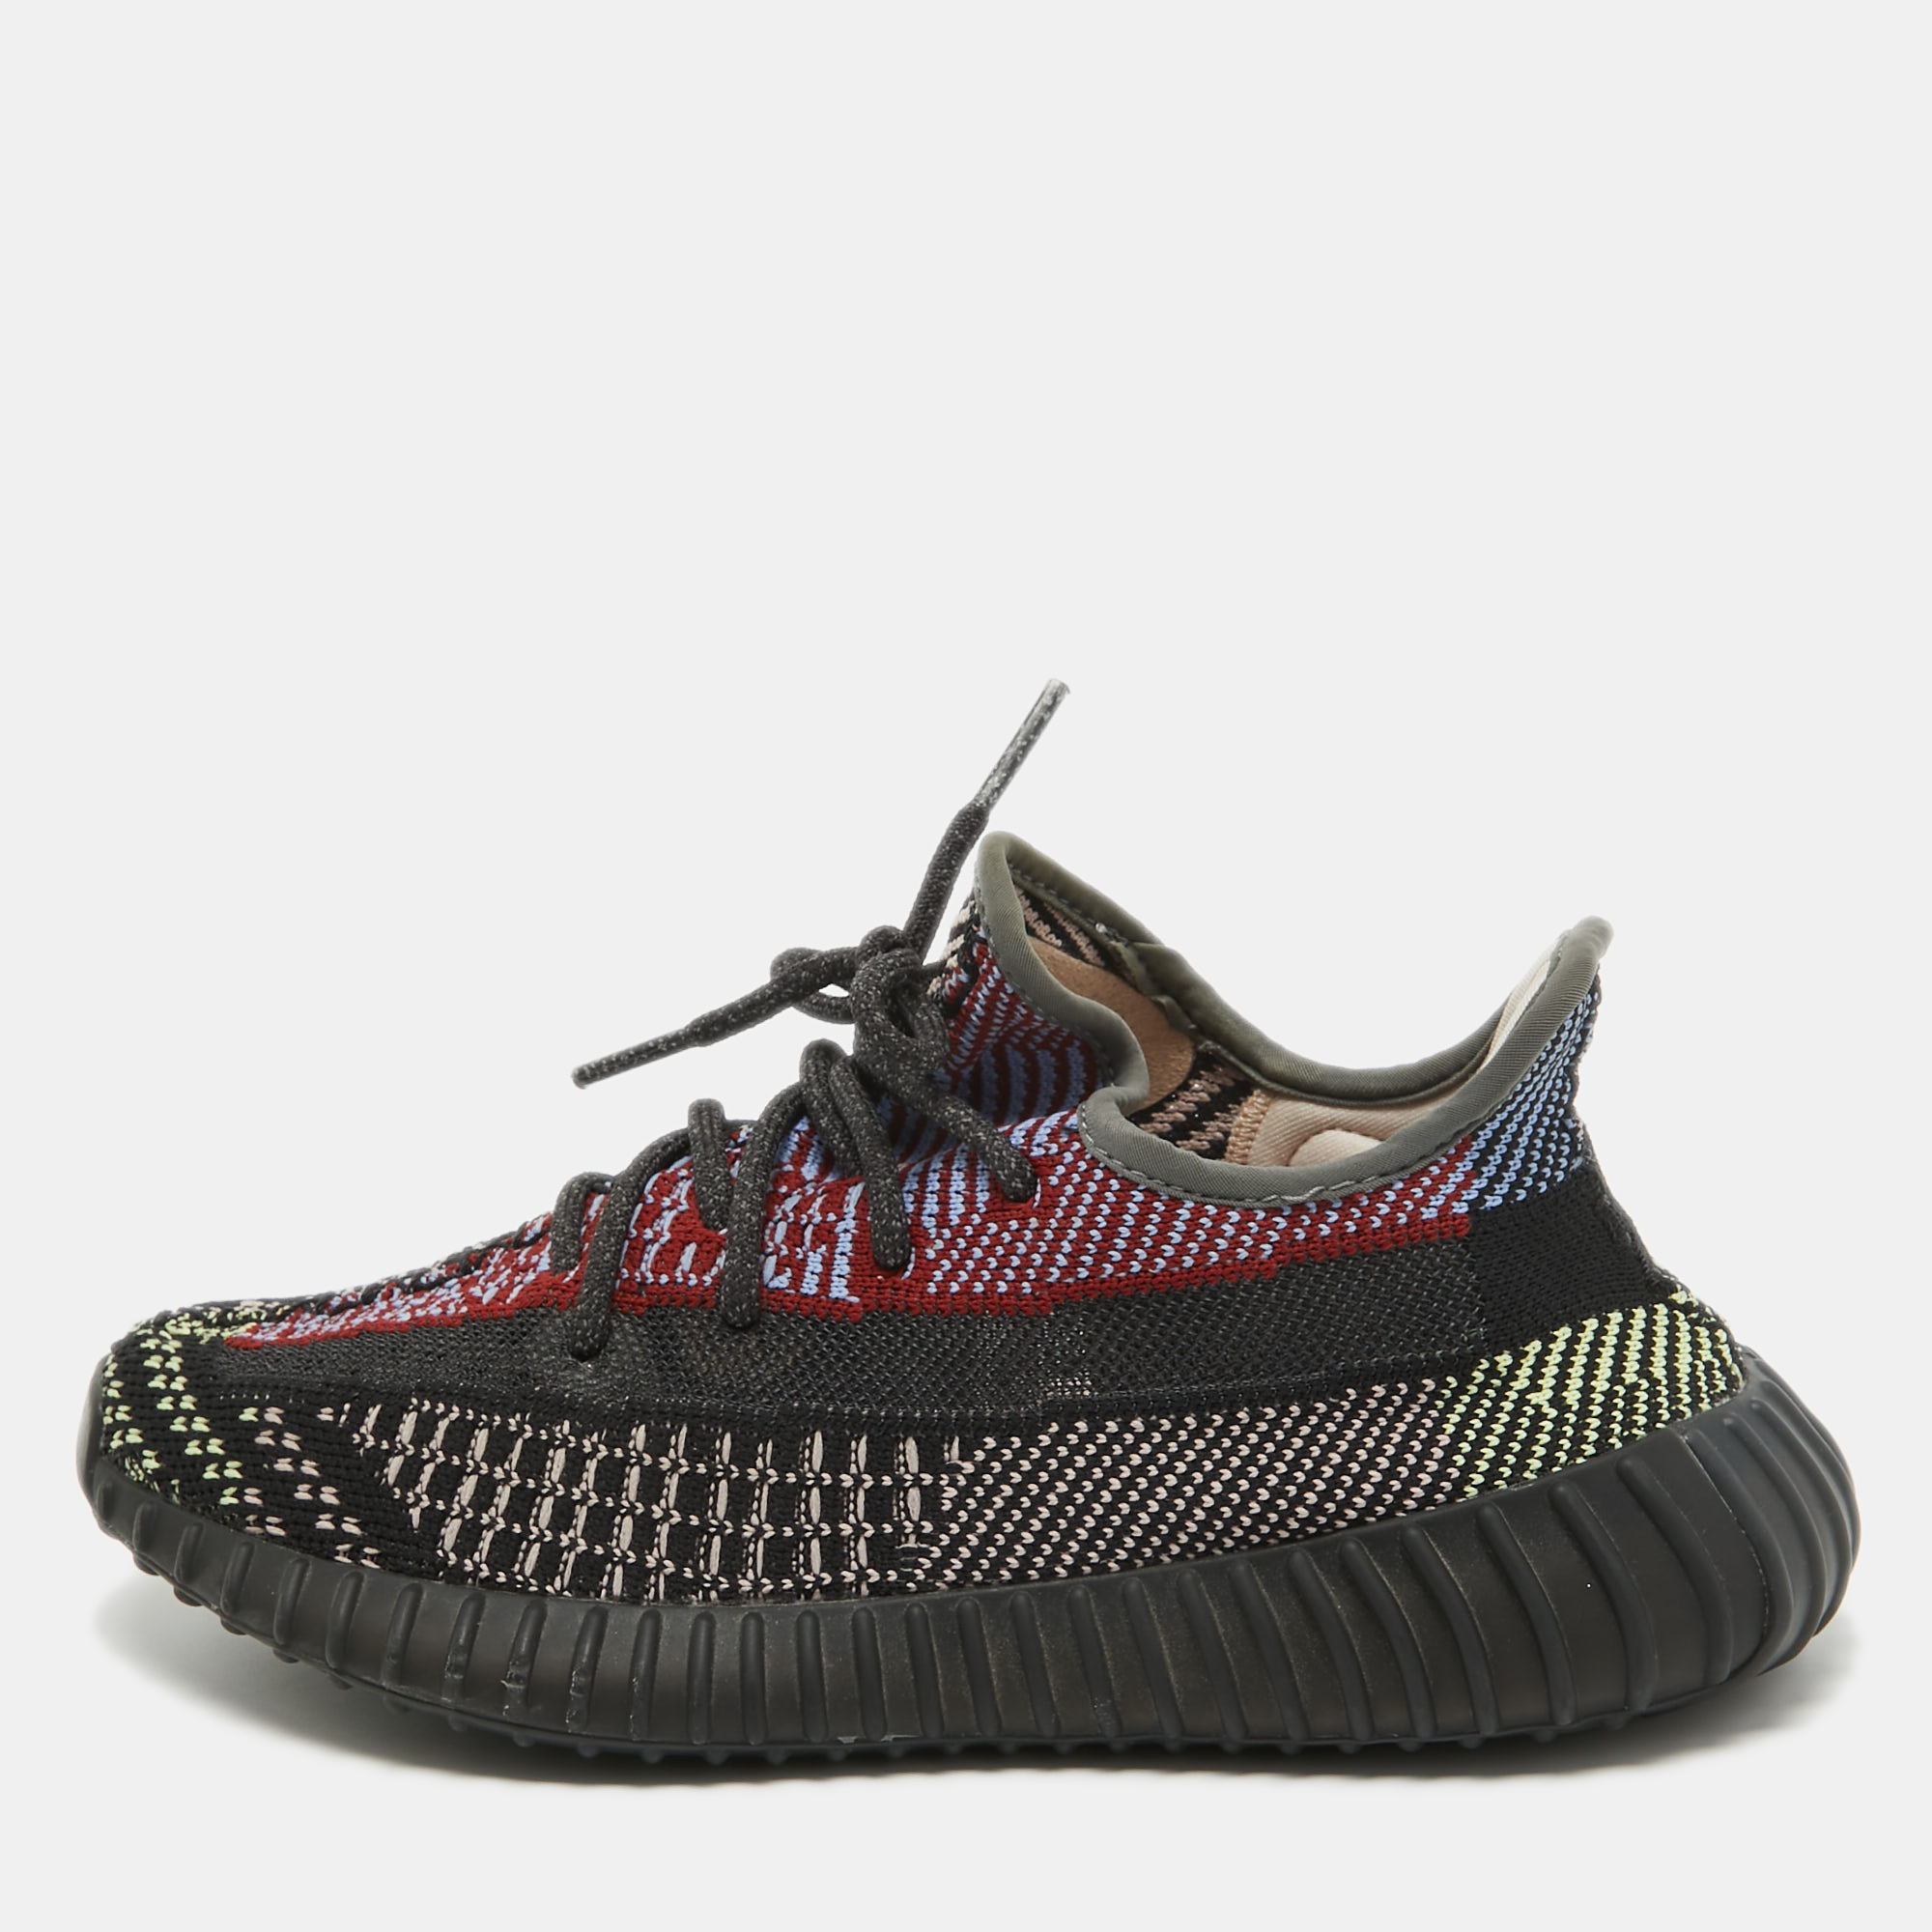 Yeezy X Adidas Black Knit Fabric Boost 350 V2 Yecheil Non-Reflective Sneakers Size 38 2/3